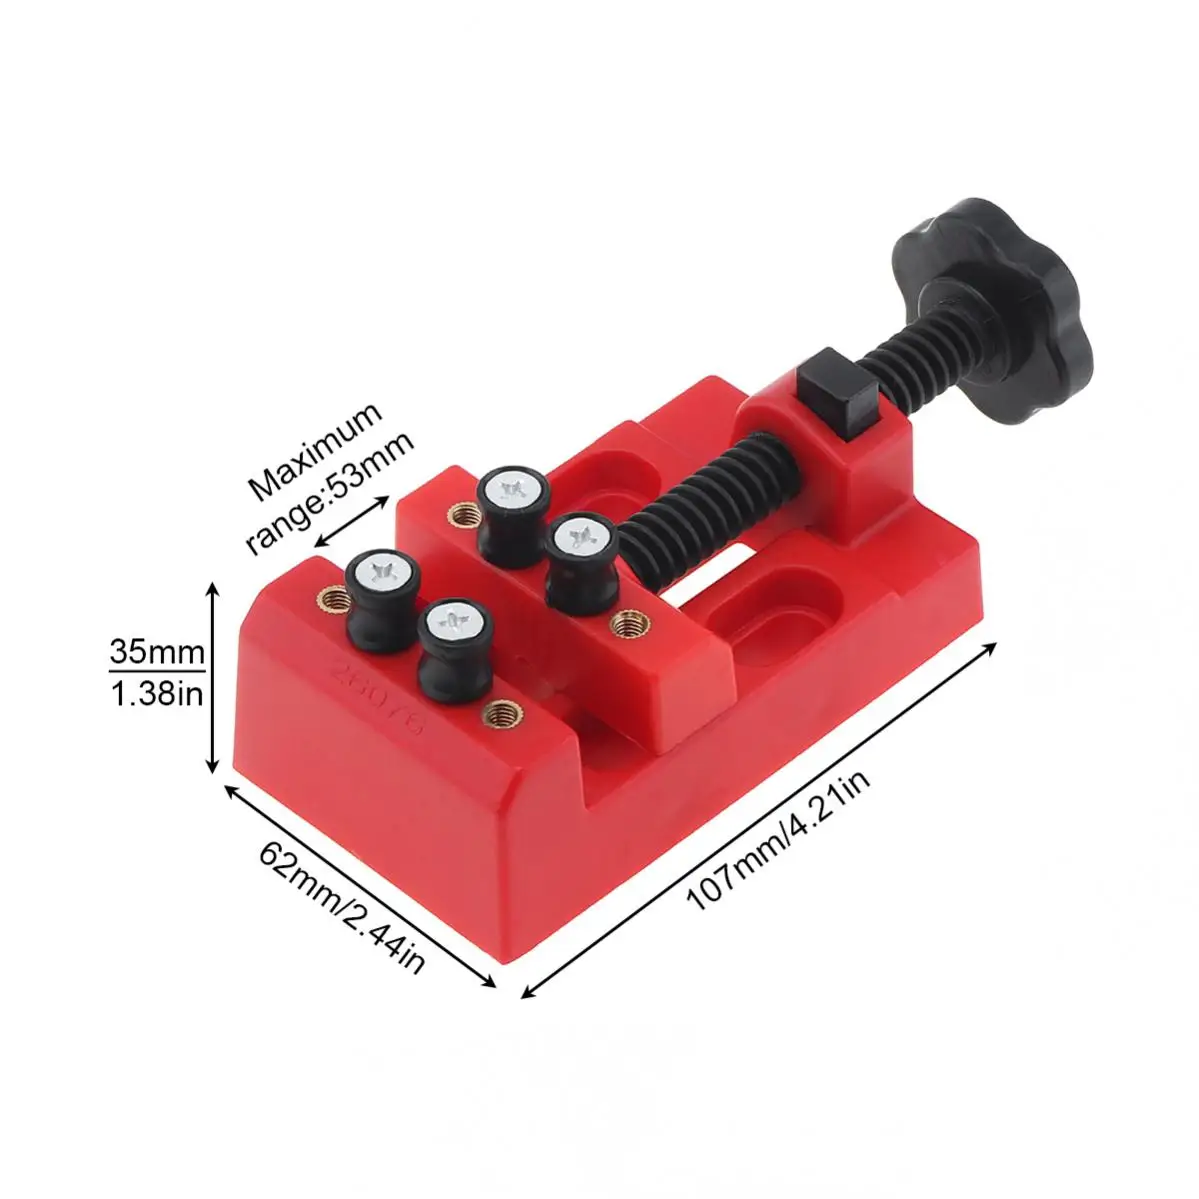 Mini Eight Hole Flat Vise With Quick Adjustment Drill Press Vise for Walnut or DIY Sculpture Bodhi Bead Jig